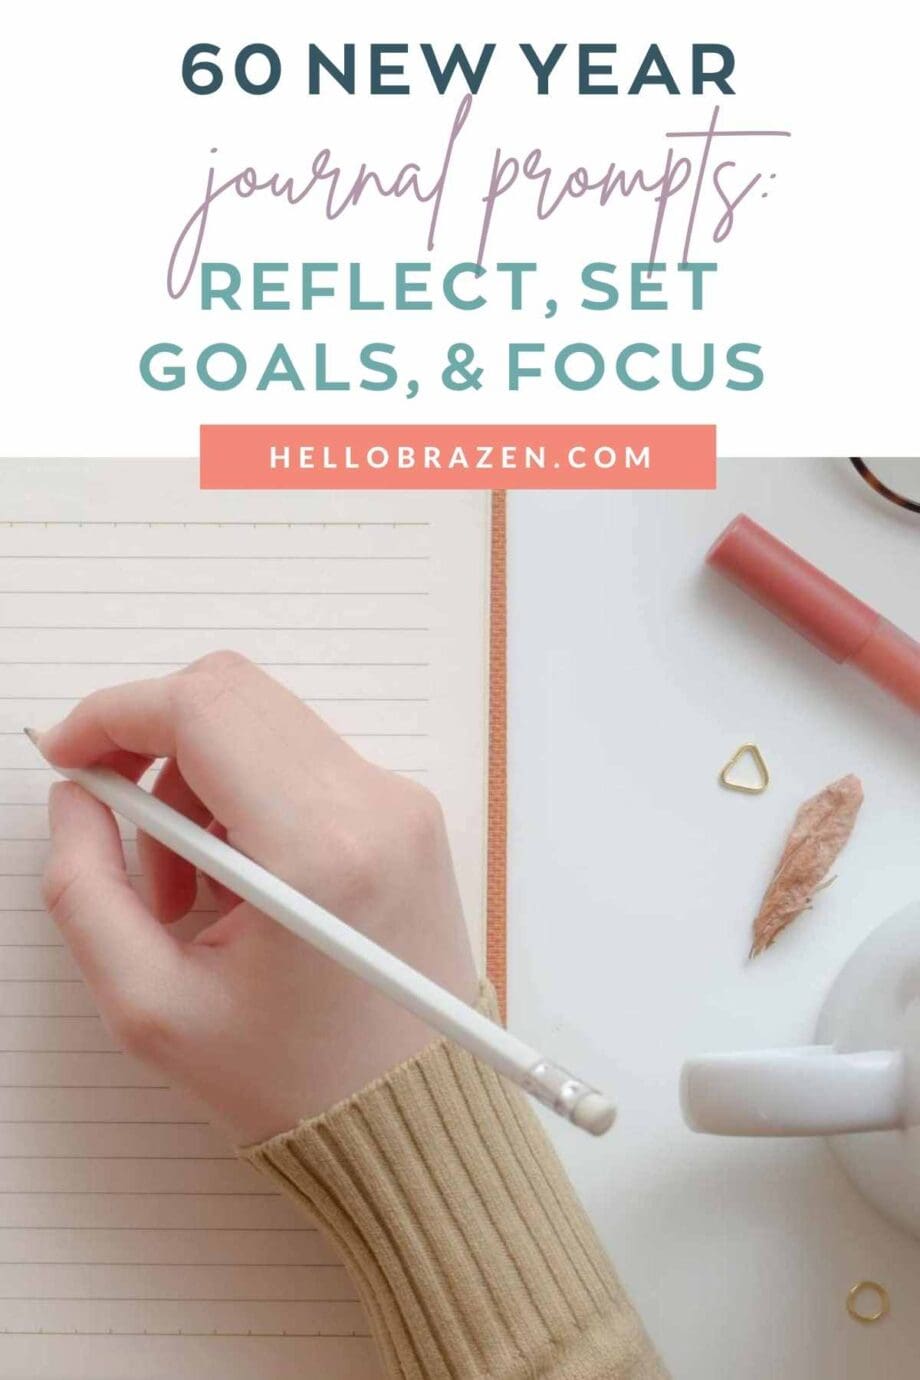 The new year is a time for reflection, goal setting, and focus. Journaling is the perfect way to do all three. By taking the time to reflect on your past year, set goals for the new year, and focus on what's important to you, you can start the new year off on the right foot. Here are 60 new year journal prompts to help you reflect, set goals, and focus for the new year.